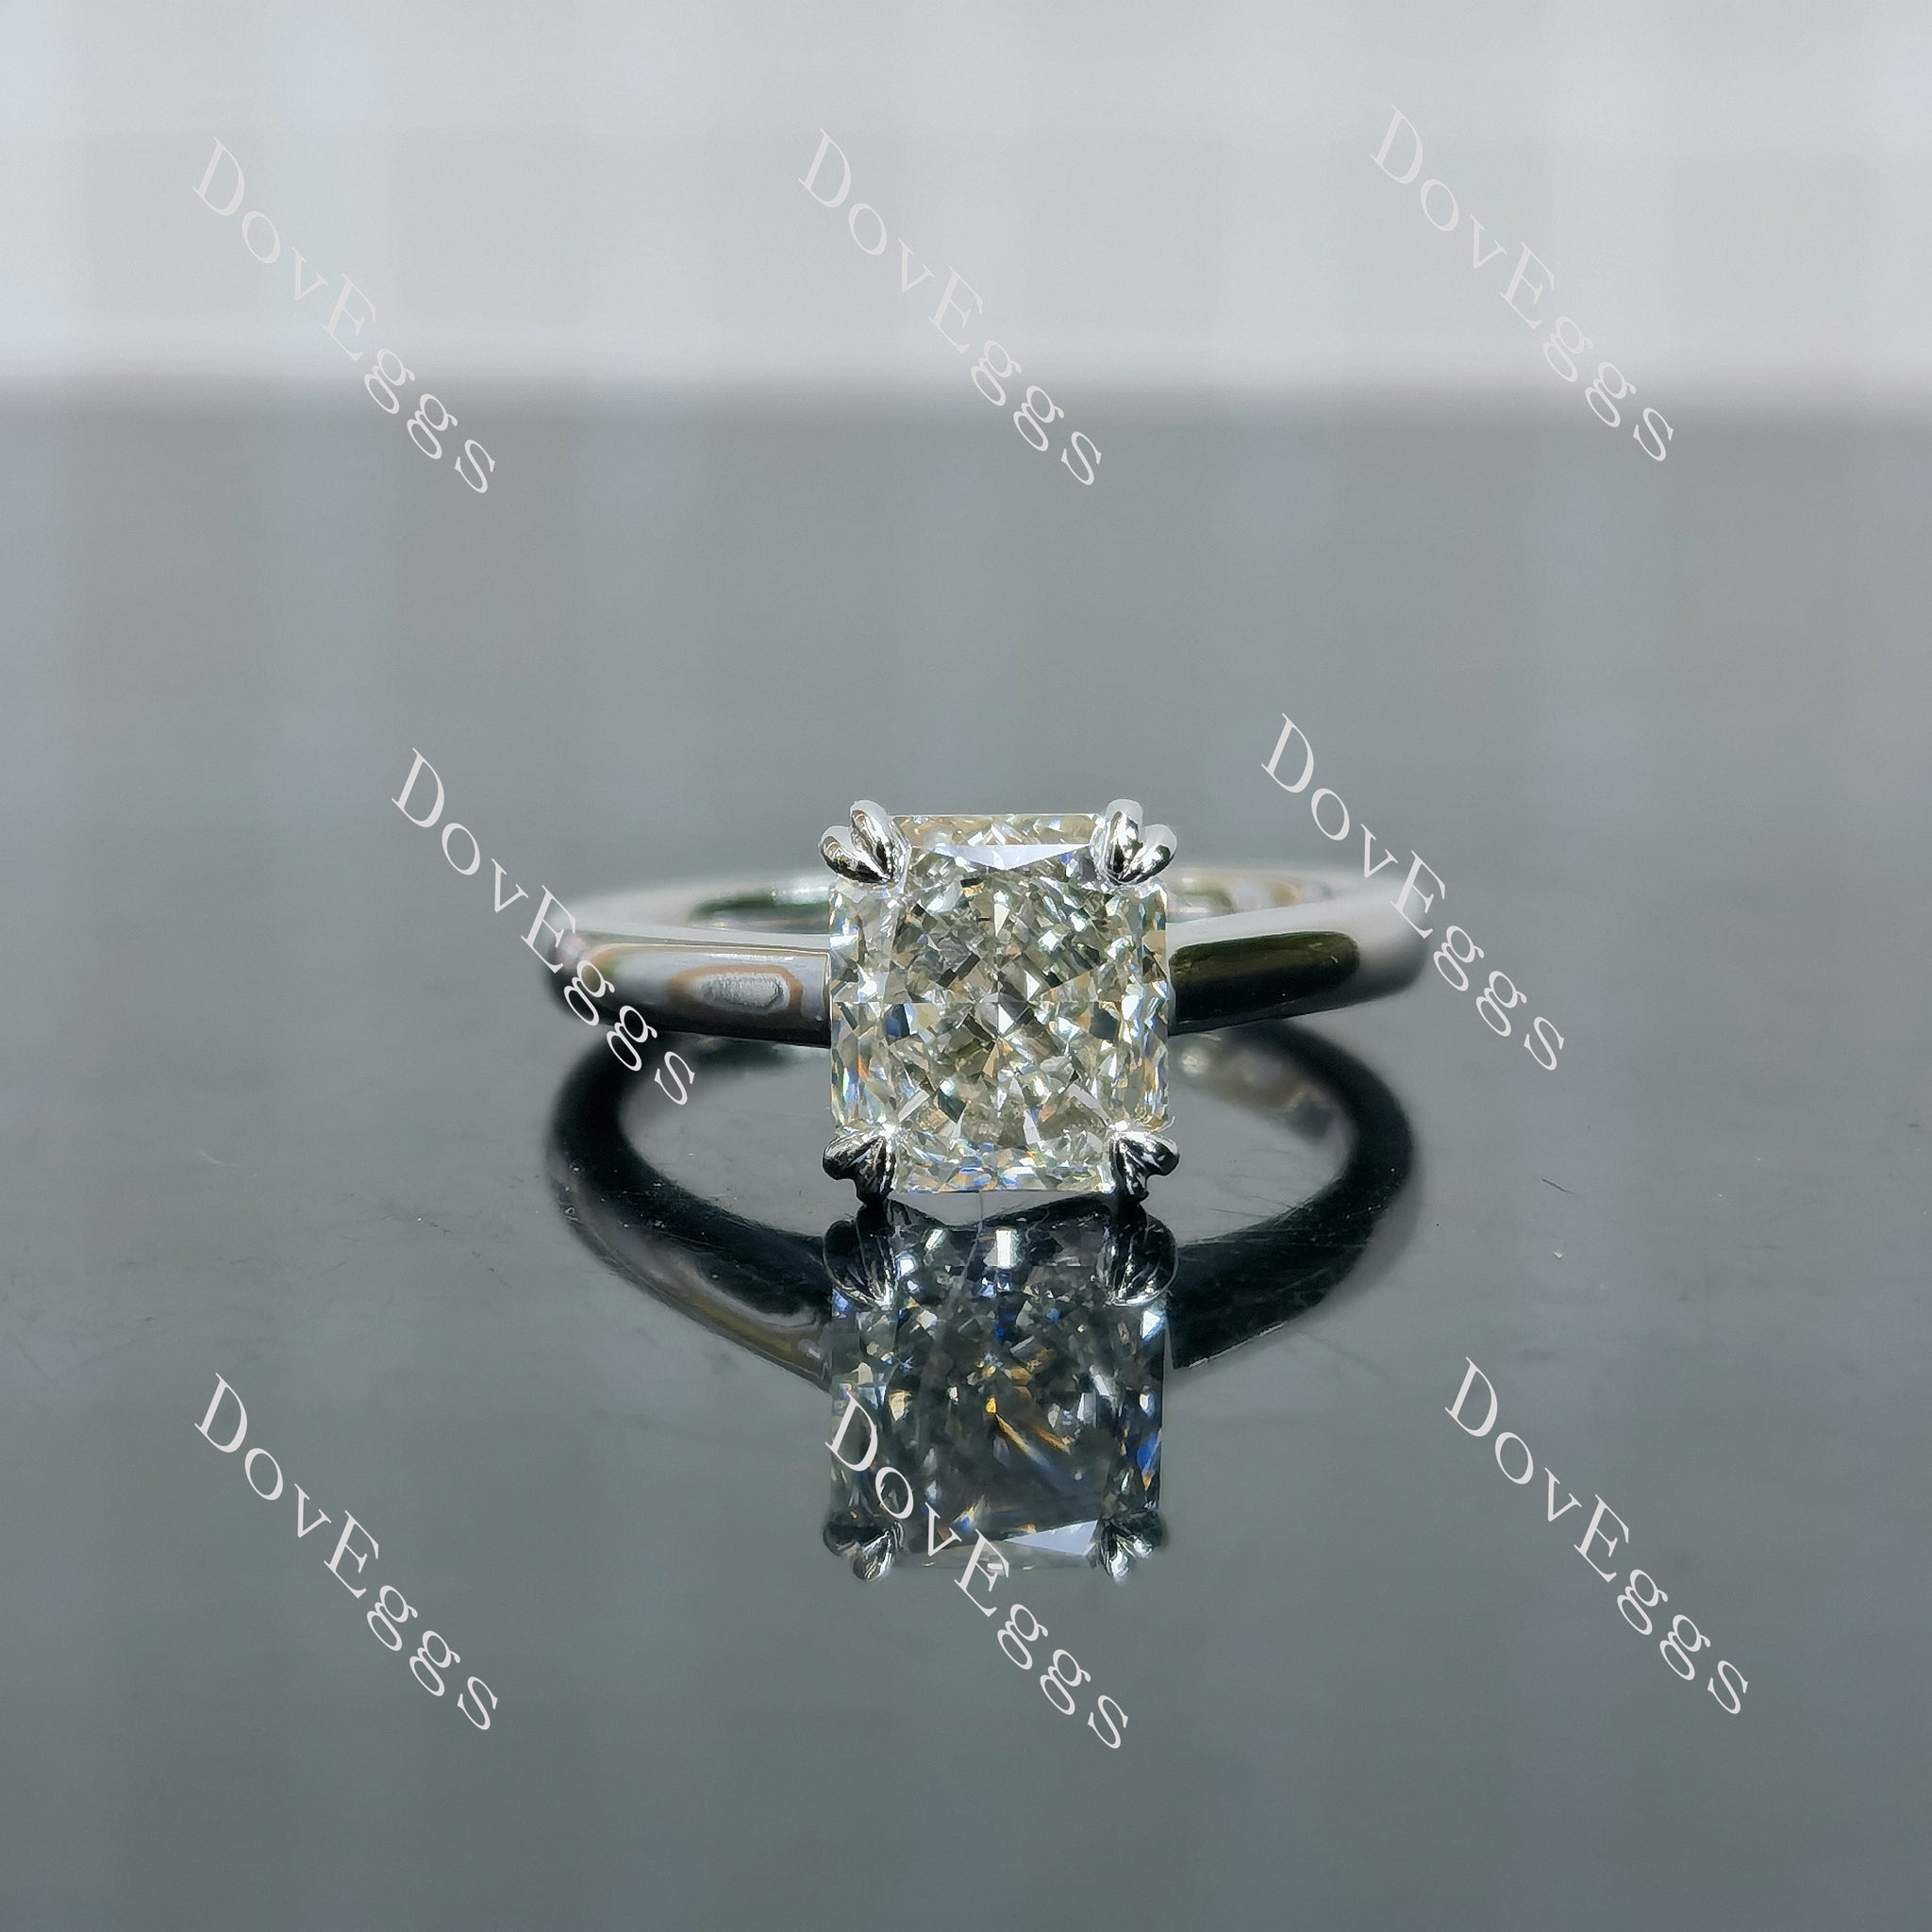 The Jessica radiant pave moissanite engagement ring